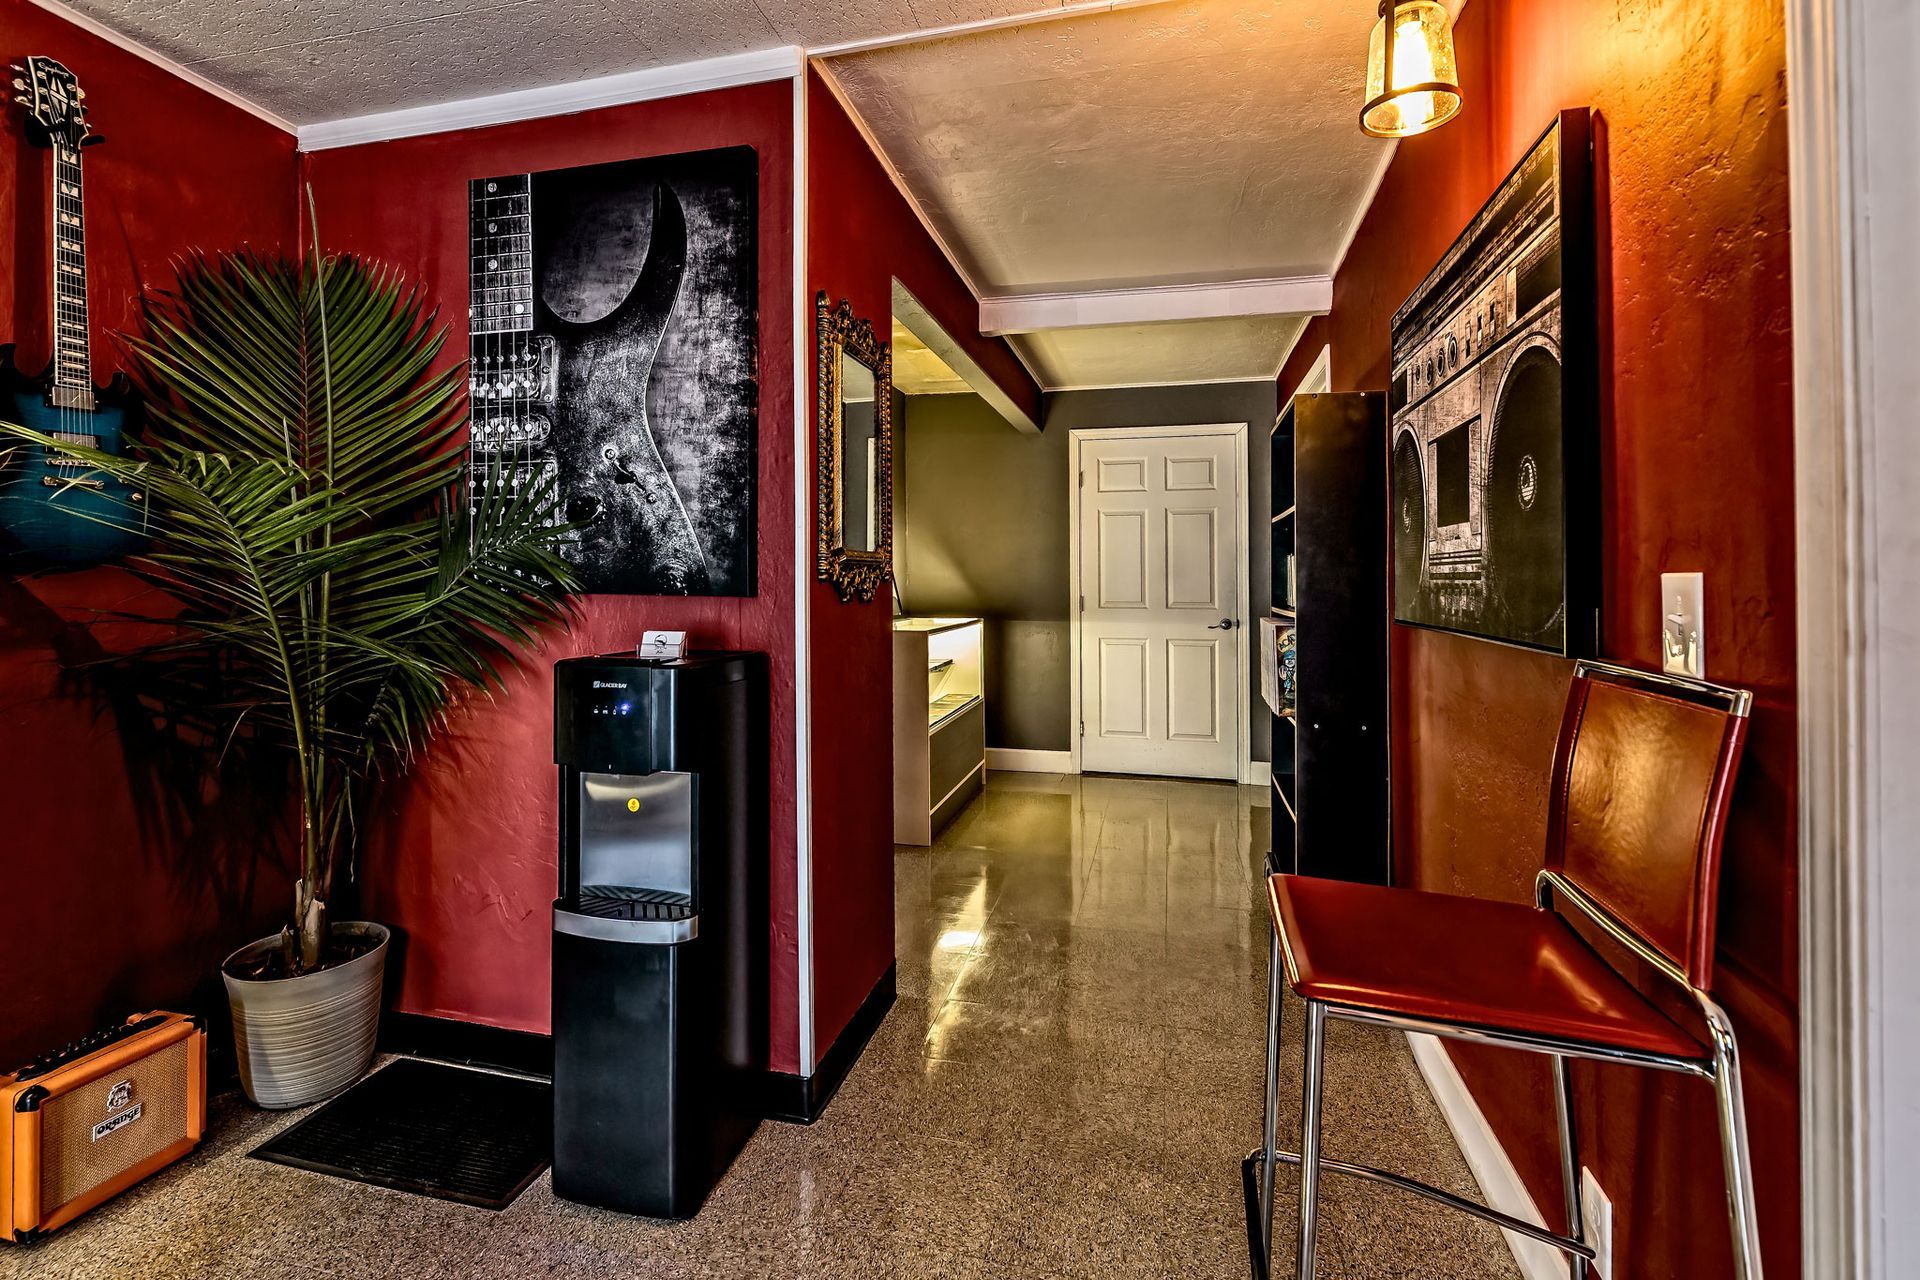 A hallway with red walls, a chair, a water dispenser and a guitar on the wall